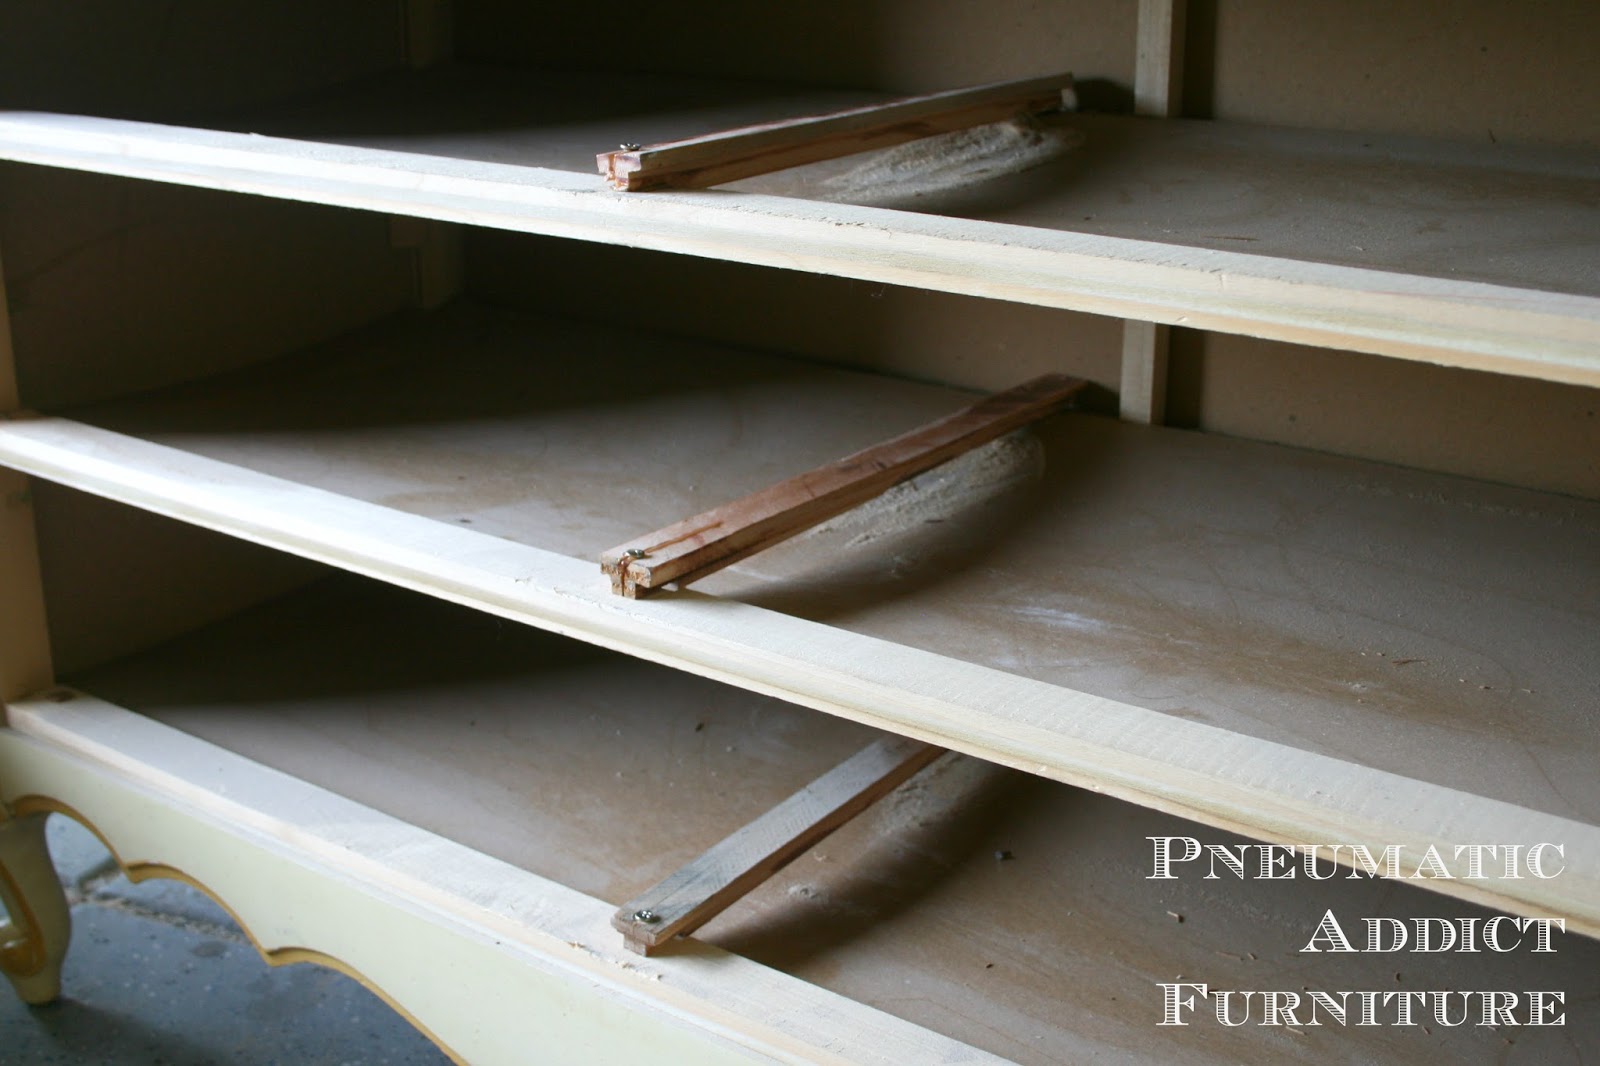 How To Build Your Own Drawer Slides, Wooden Tracks For Dresser Drawers